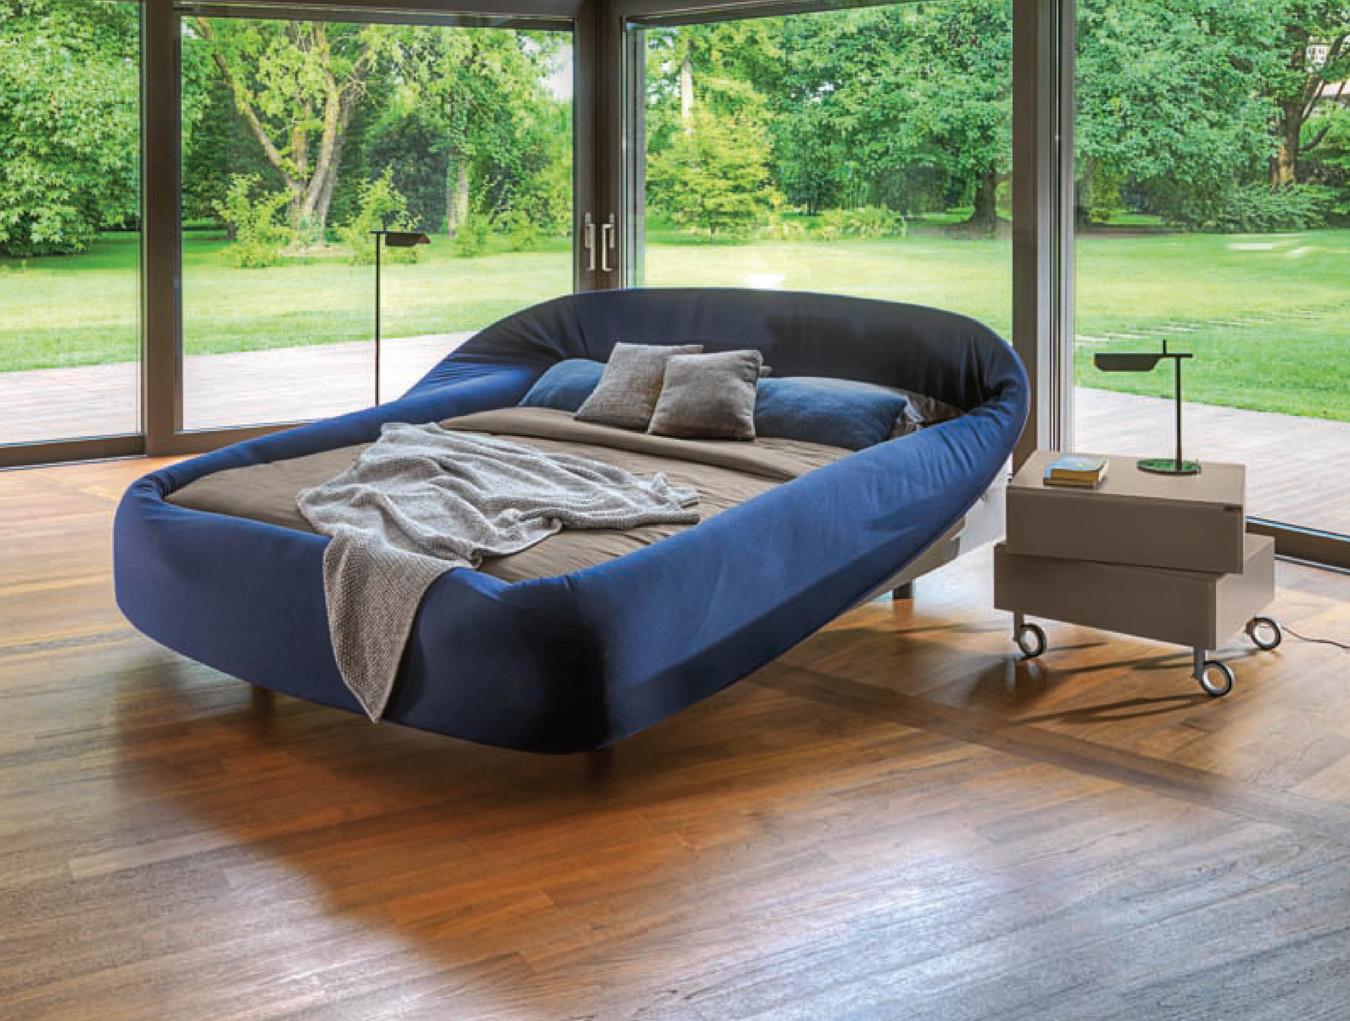 Lago Cat Bedroom Bed Colletto Bed